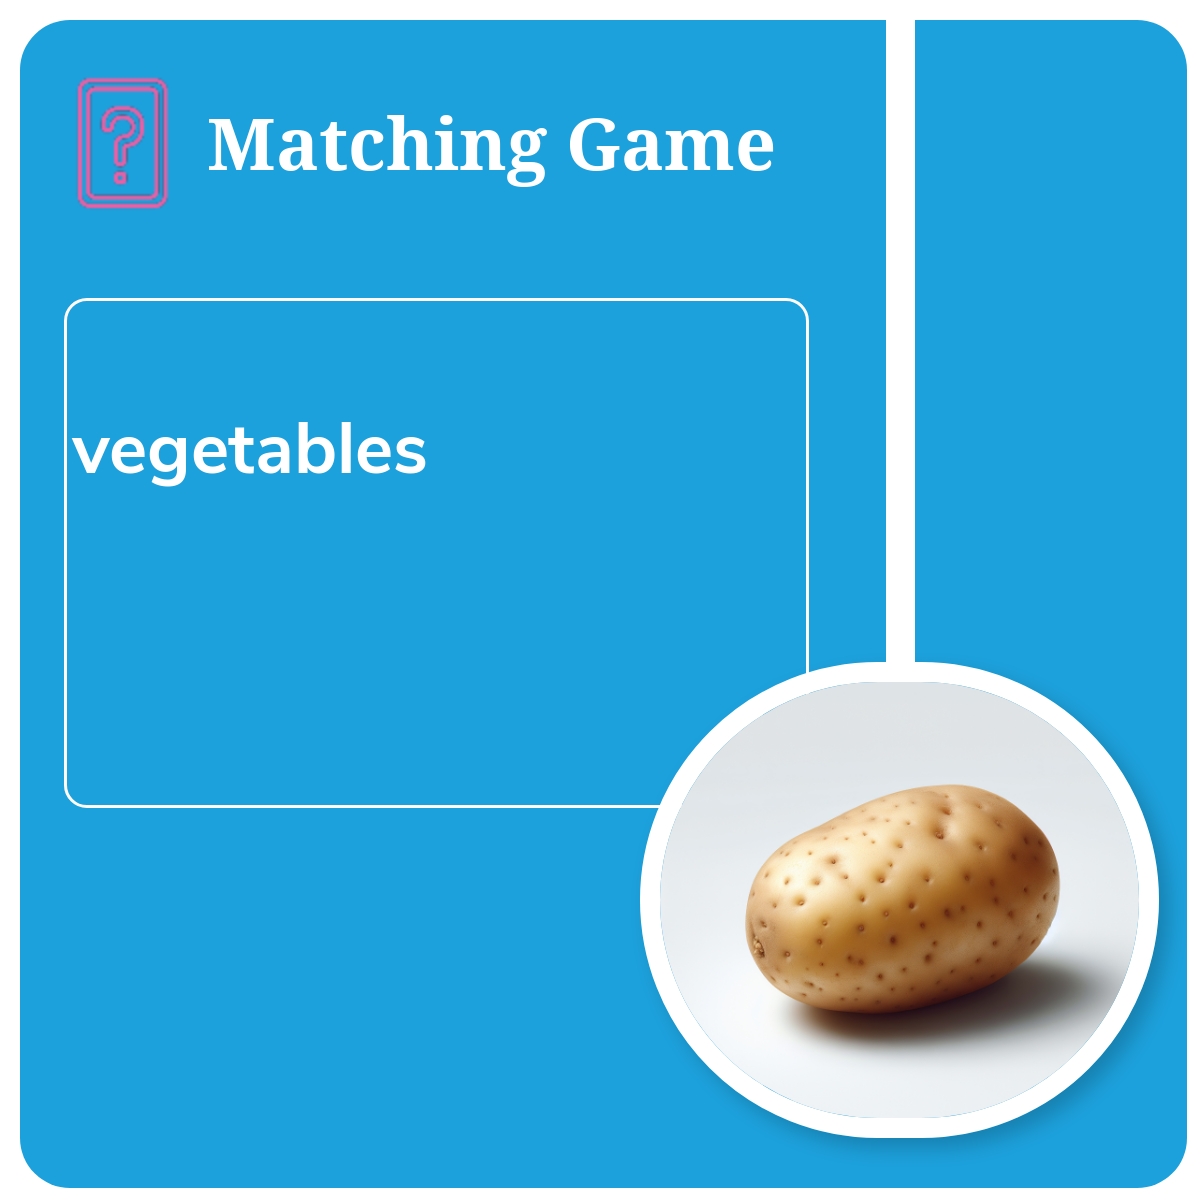 Matching Words to Pictures (Irish): vegetables